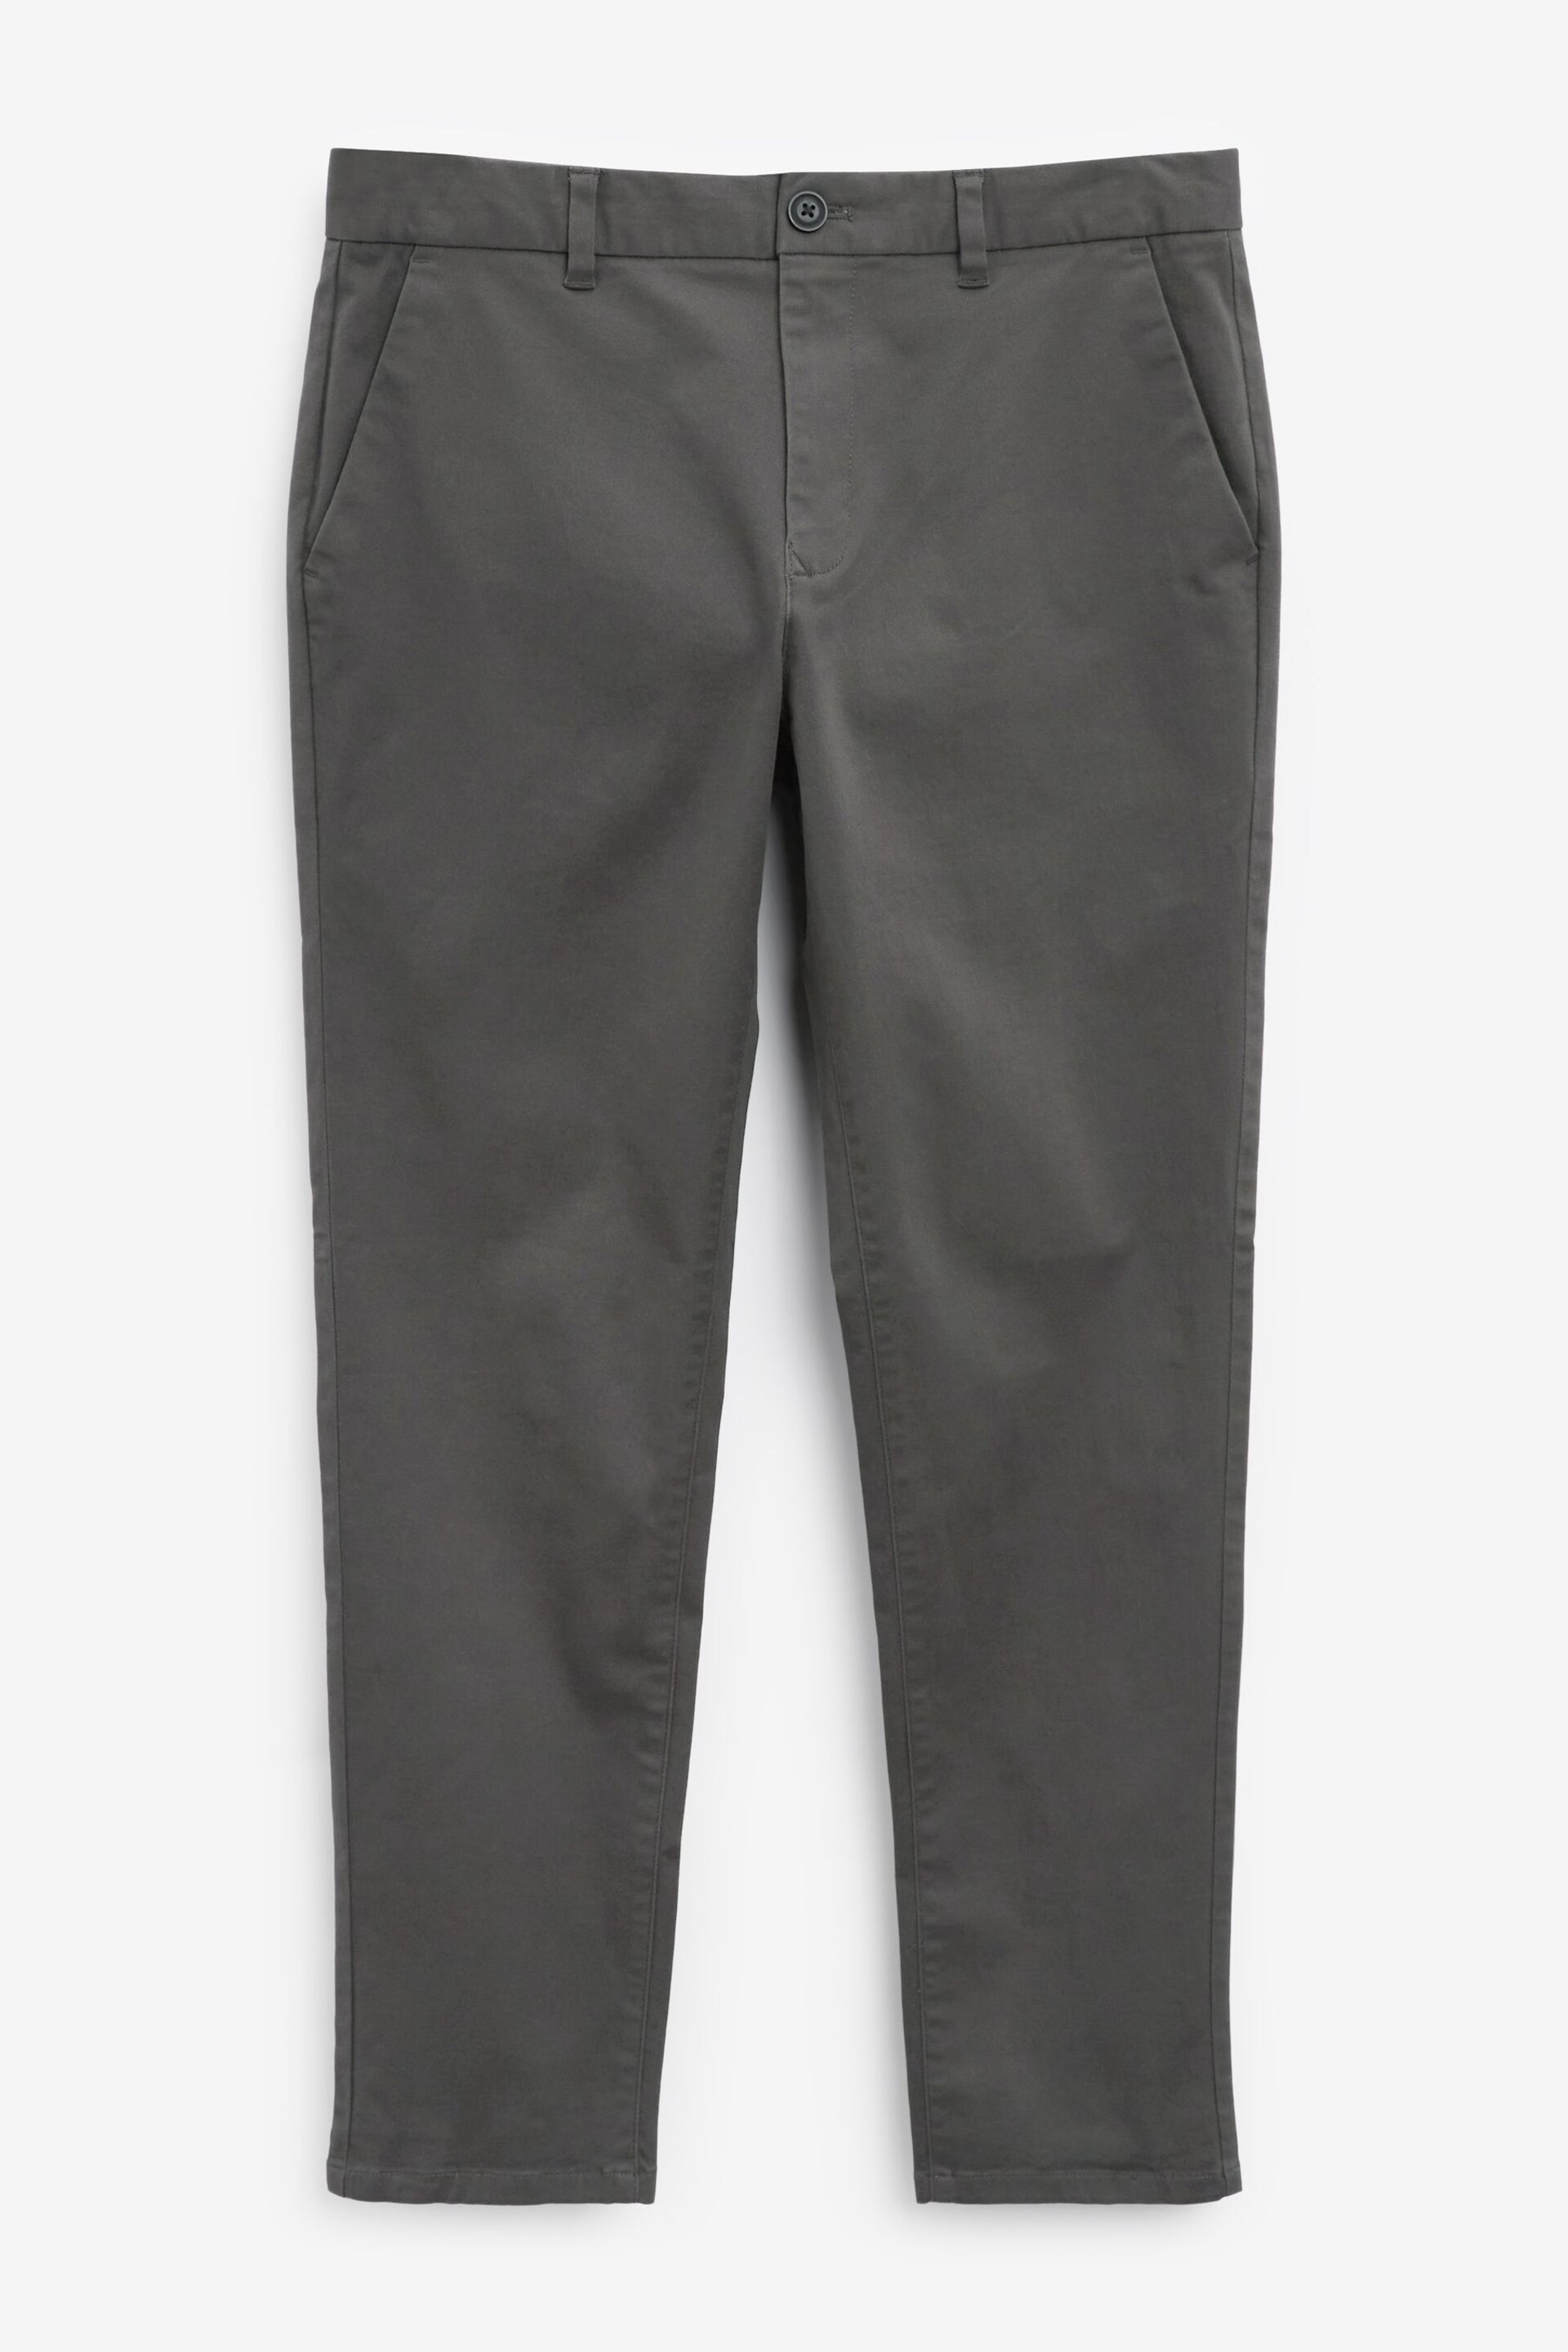 Dark Grey Regular Tapered Fit Stretch Chinos Trousers - Image 6 of 8